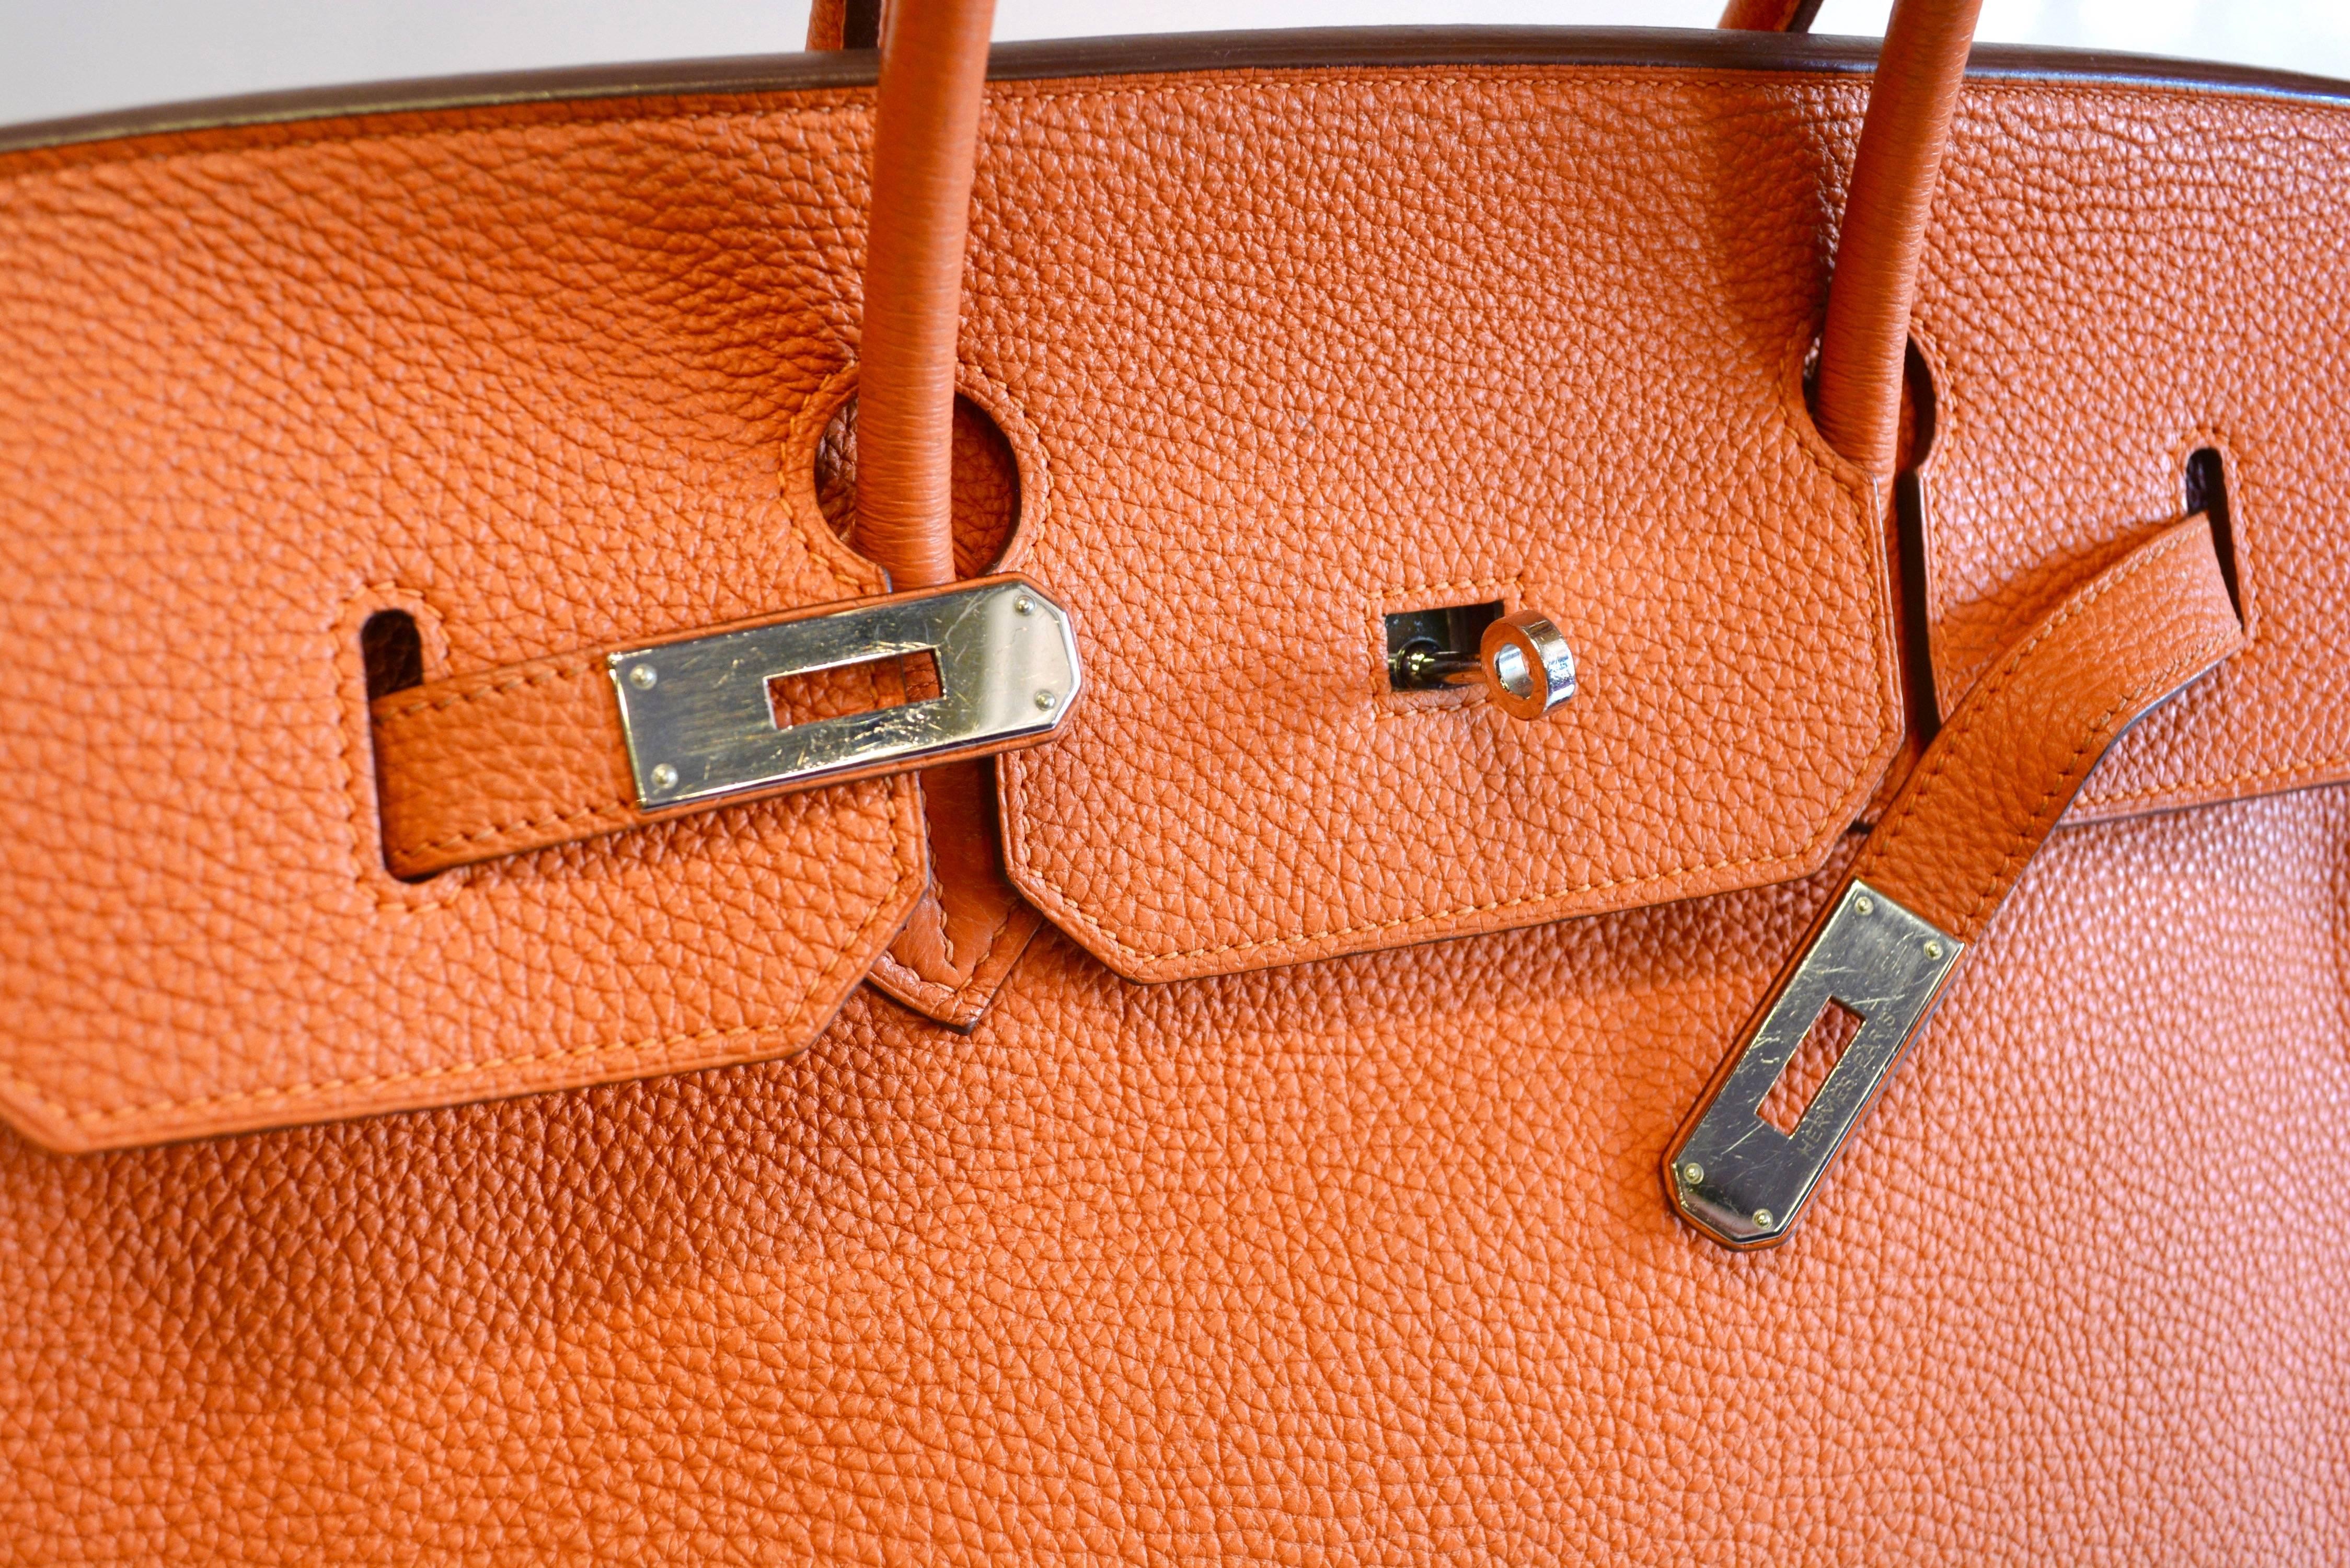 40 cm classic Birkin bag by Hermes in a lovely orange togo leather.  Condition is very clean with minimal wear as seen on the handle, which may need cleaned. Inside is clean and the body very good.  Includes the original box and lock.  Silver